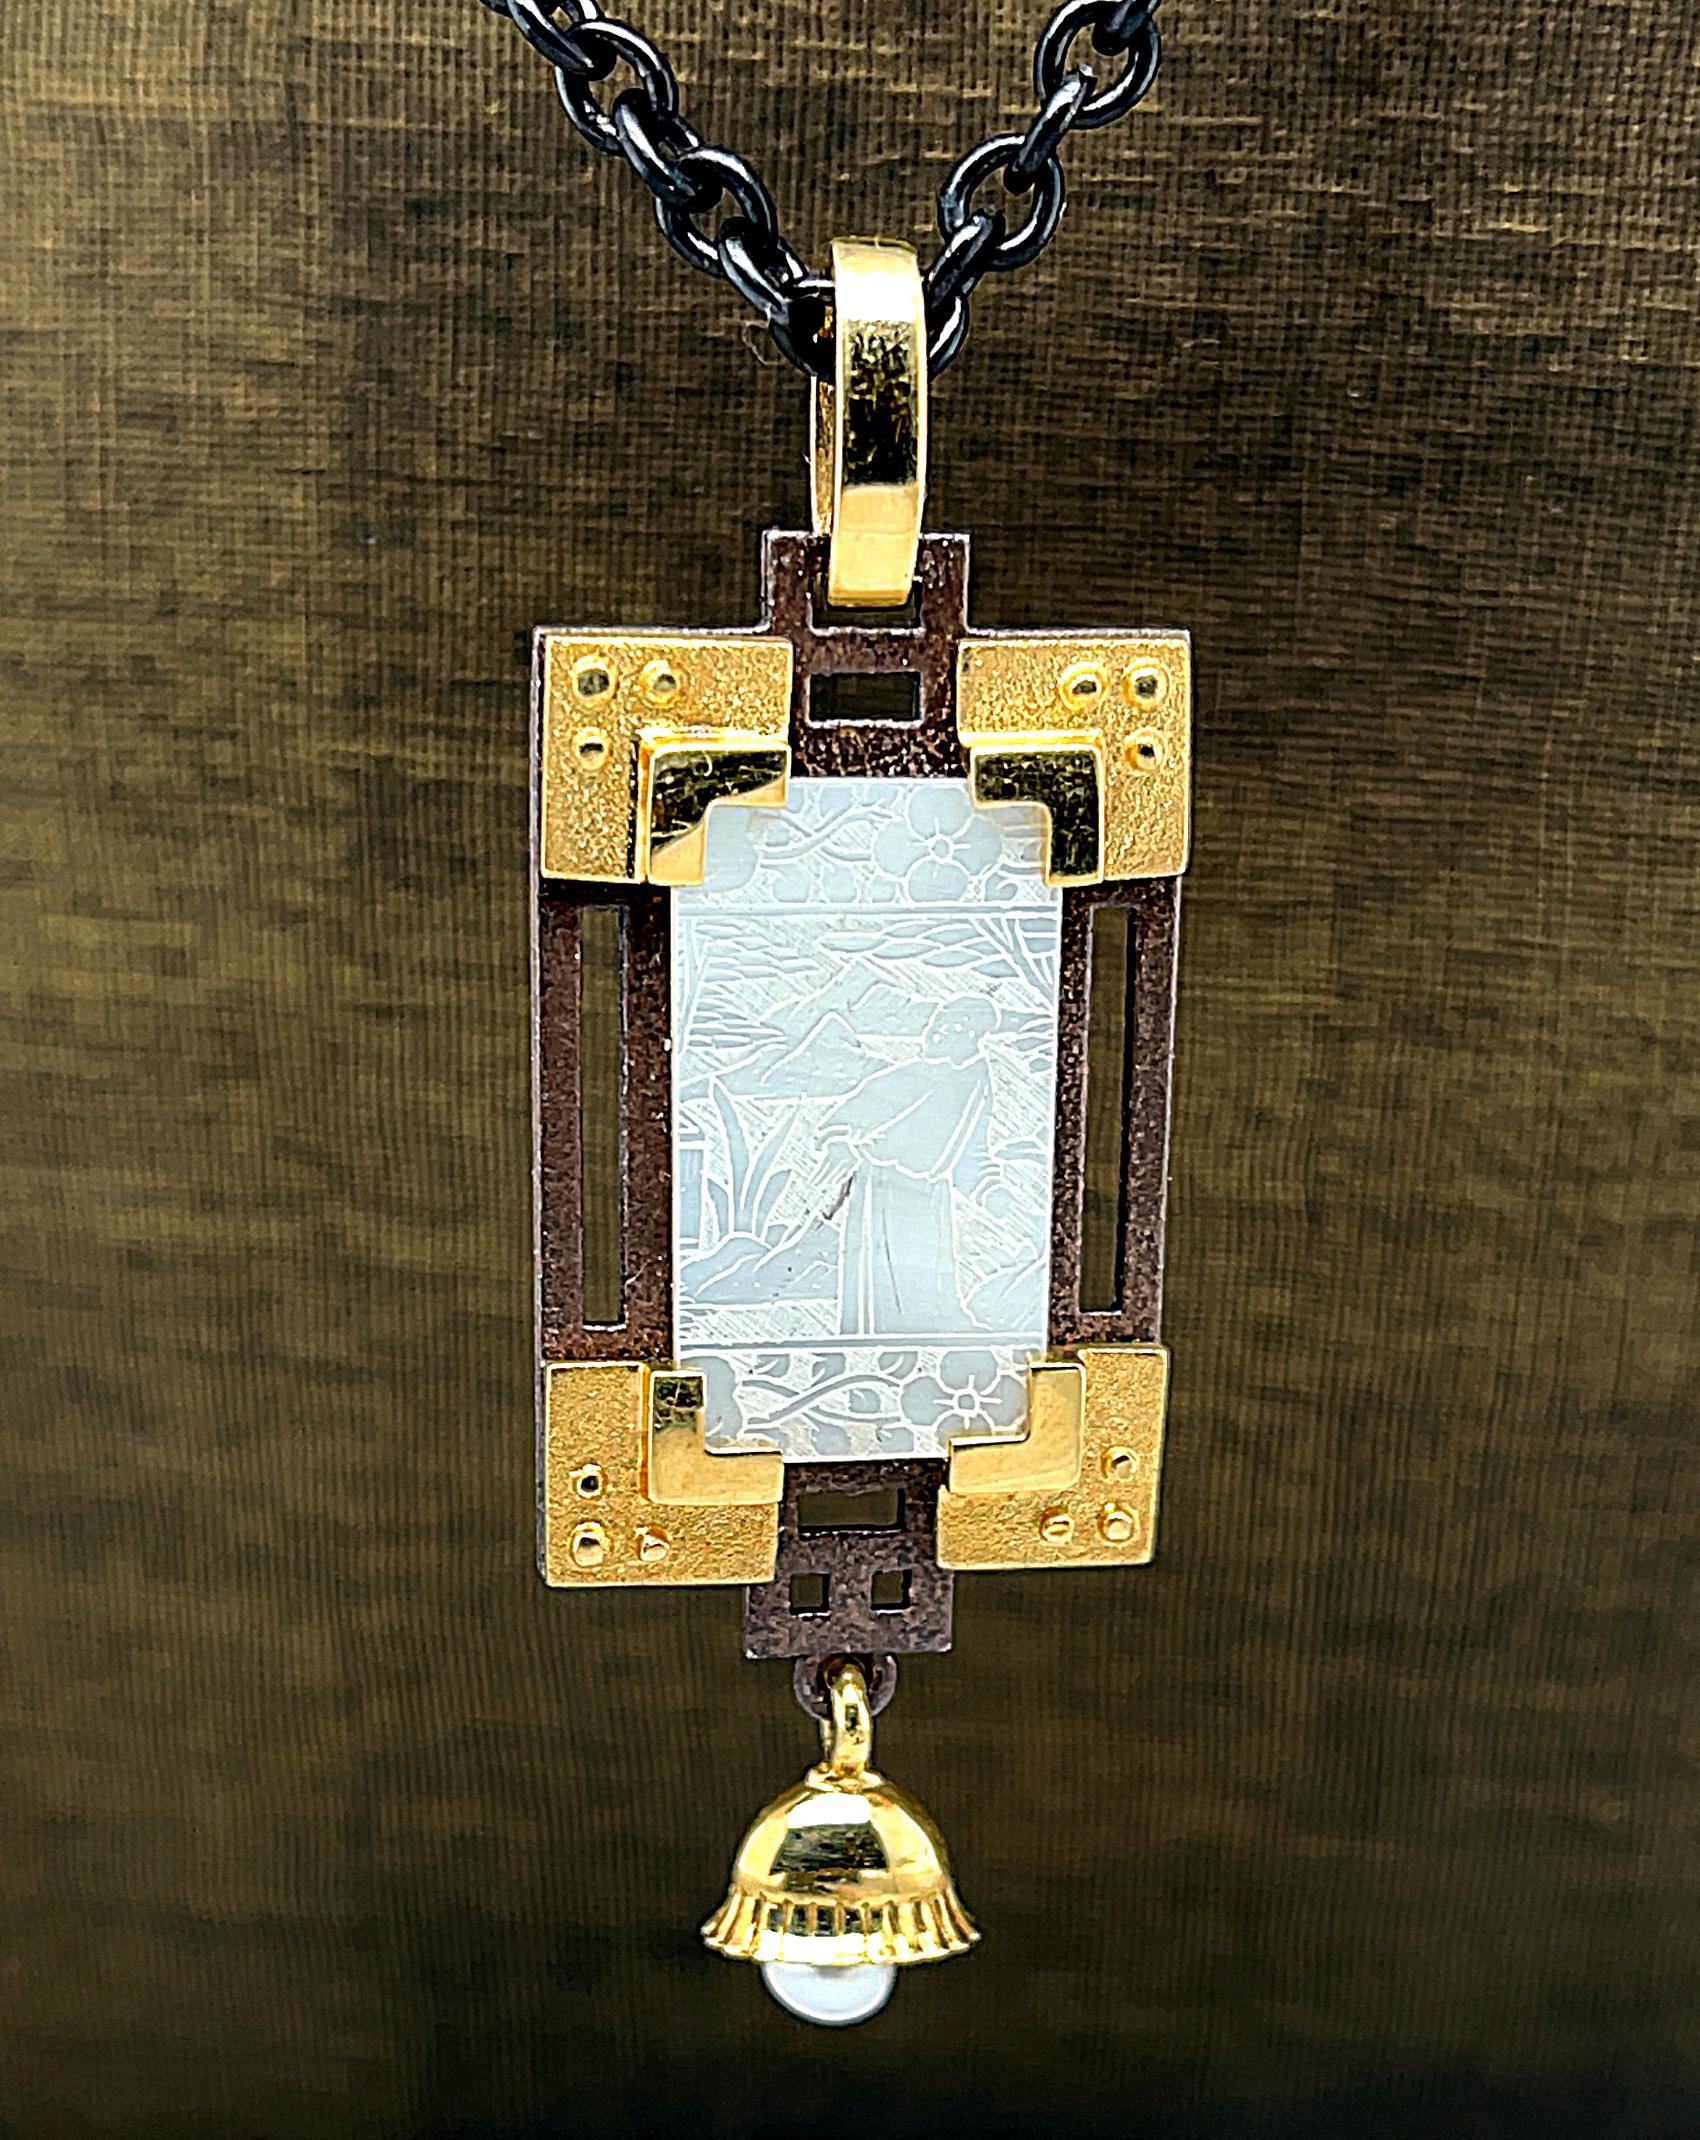 This pendant features an original antique mother-of-pearl Chinese gambling counter that has been finely engraved with a beautiful scene depicting life in 18th Century China. These gaming counters were carved in China for export to Britain, where